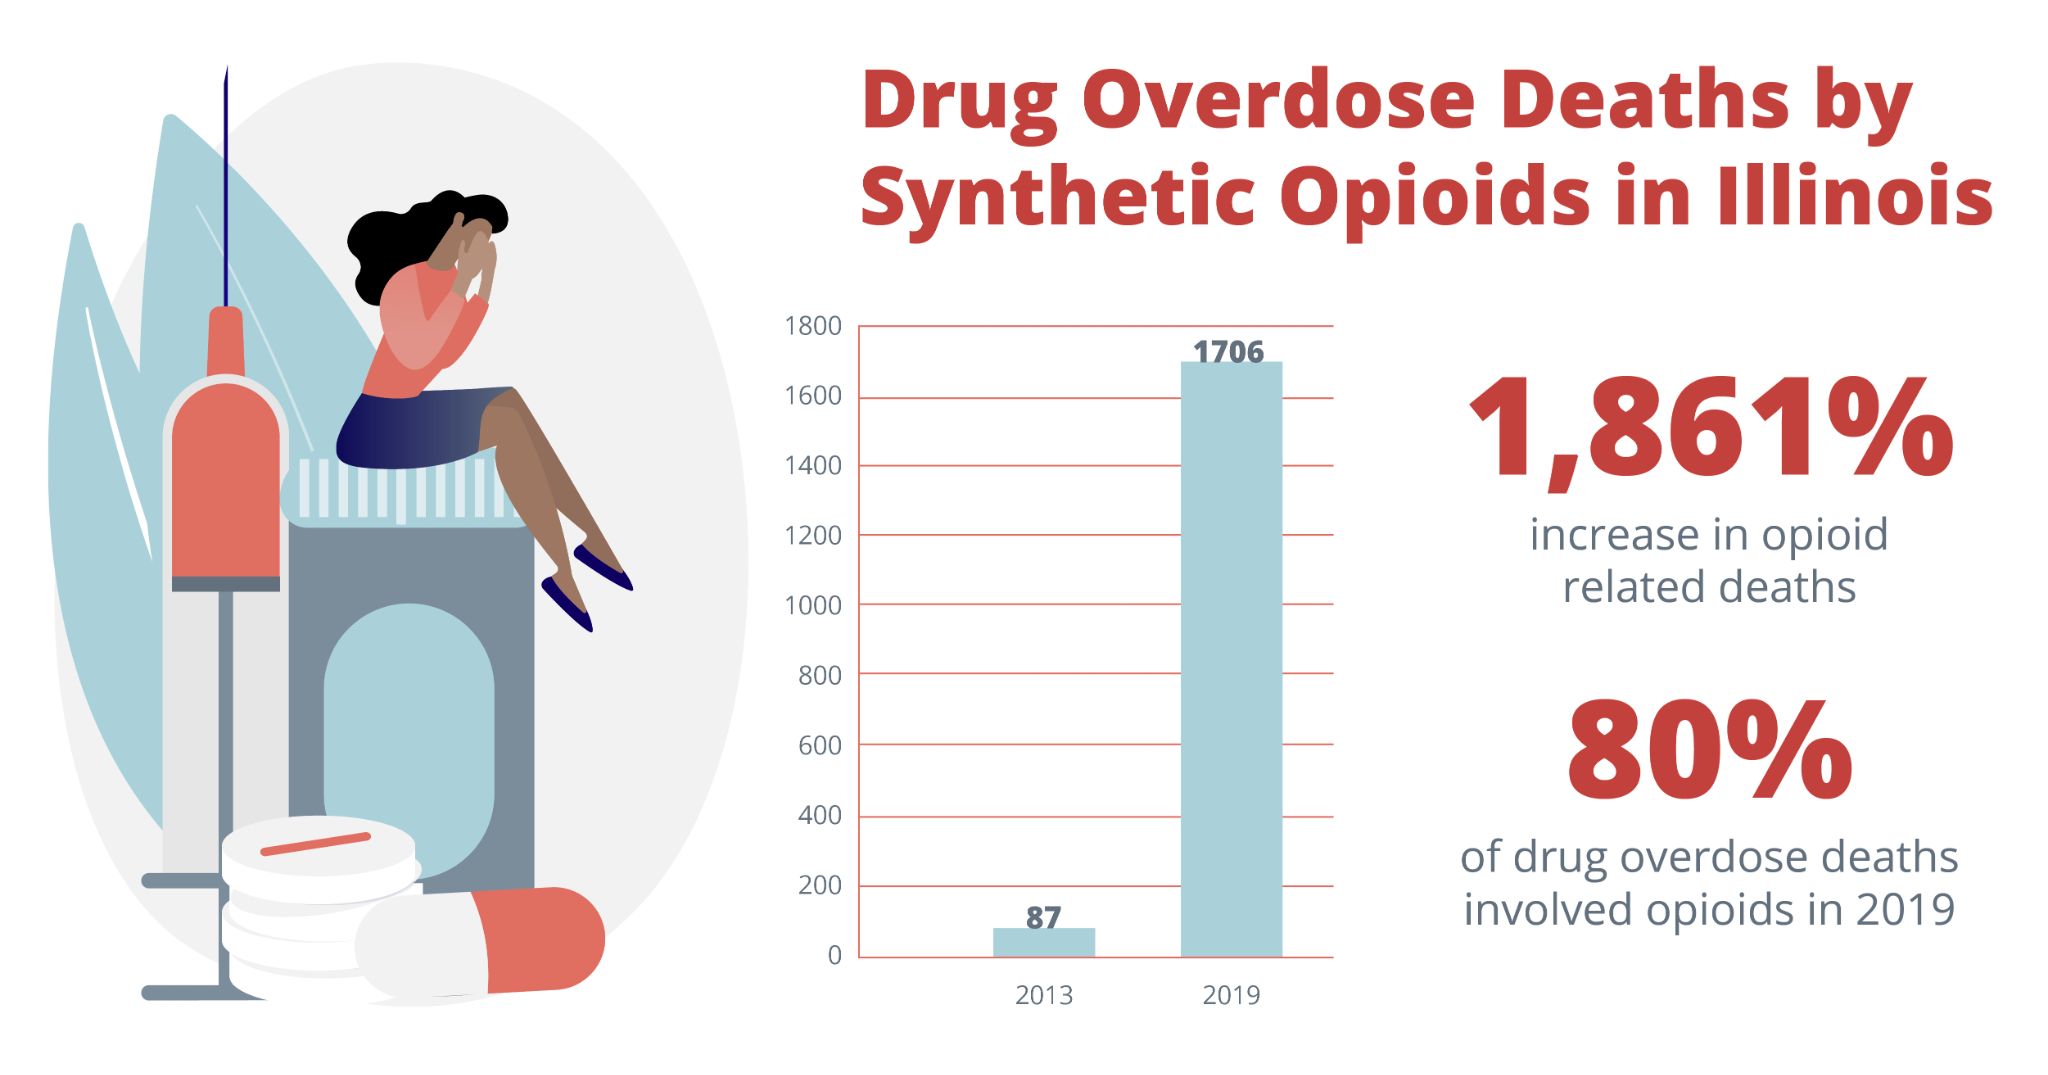 Drug overdose deaths by synthetic opioids in illinois. 1,861% increase in opioid related deaths. 80% of drug overdose deaths involved opioids in 2019. Drug And Alcohol Detox & Rehab, Addiction Treatment Resources in Springfield Illinois